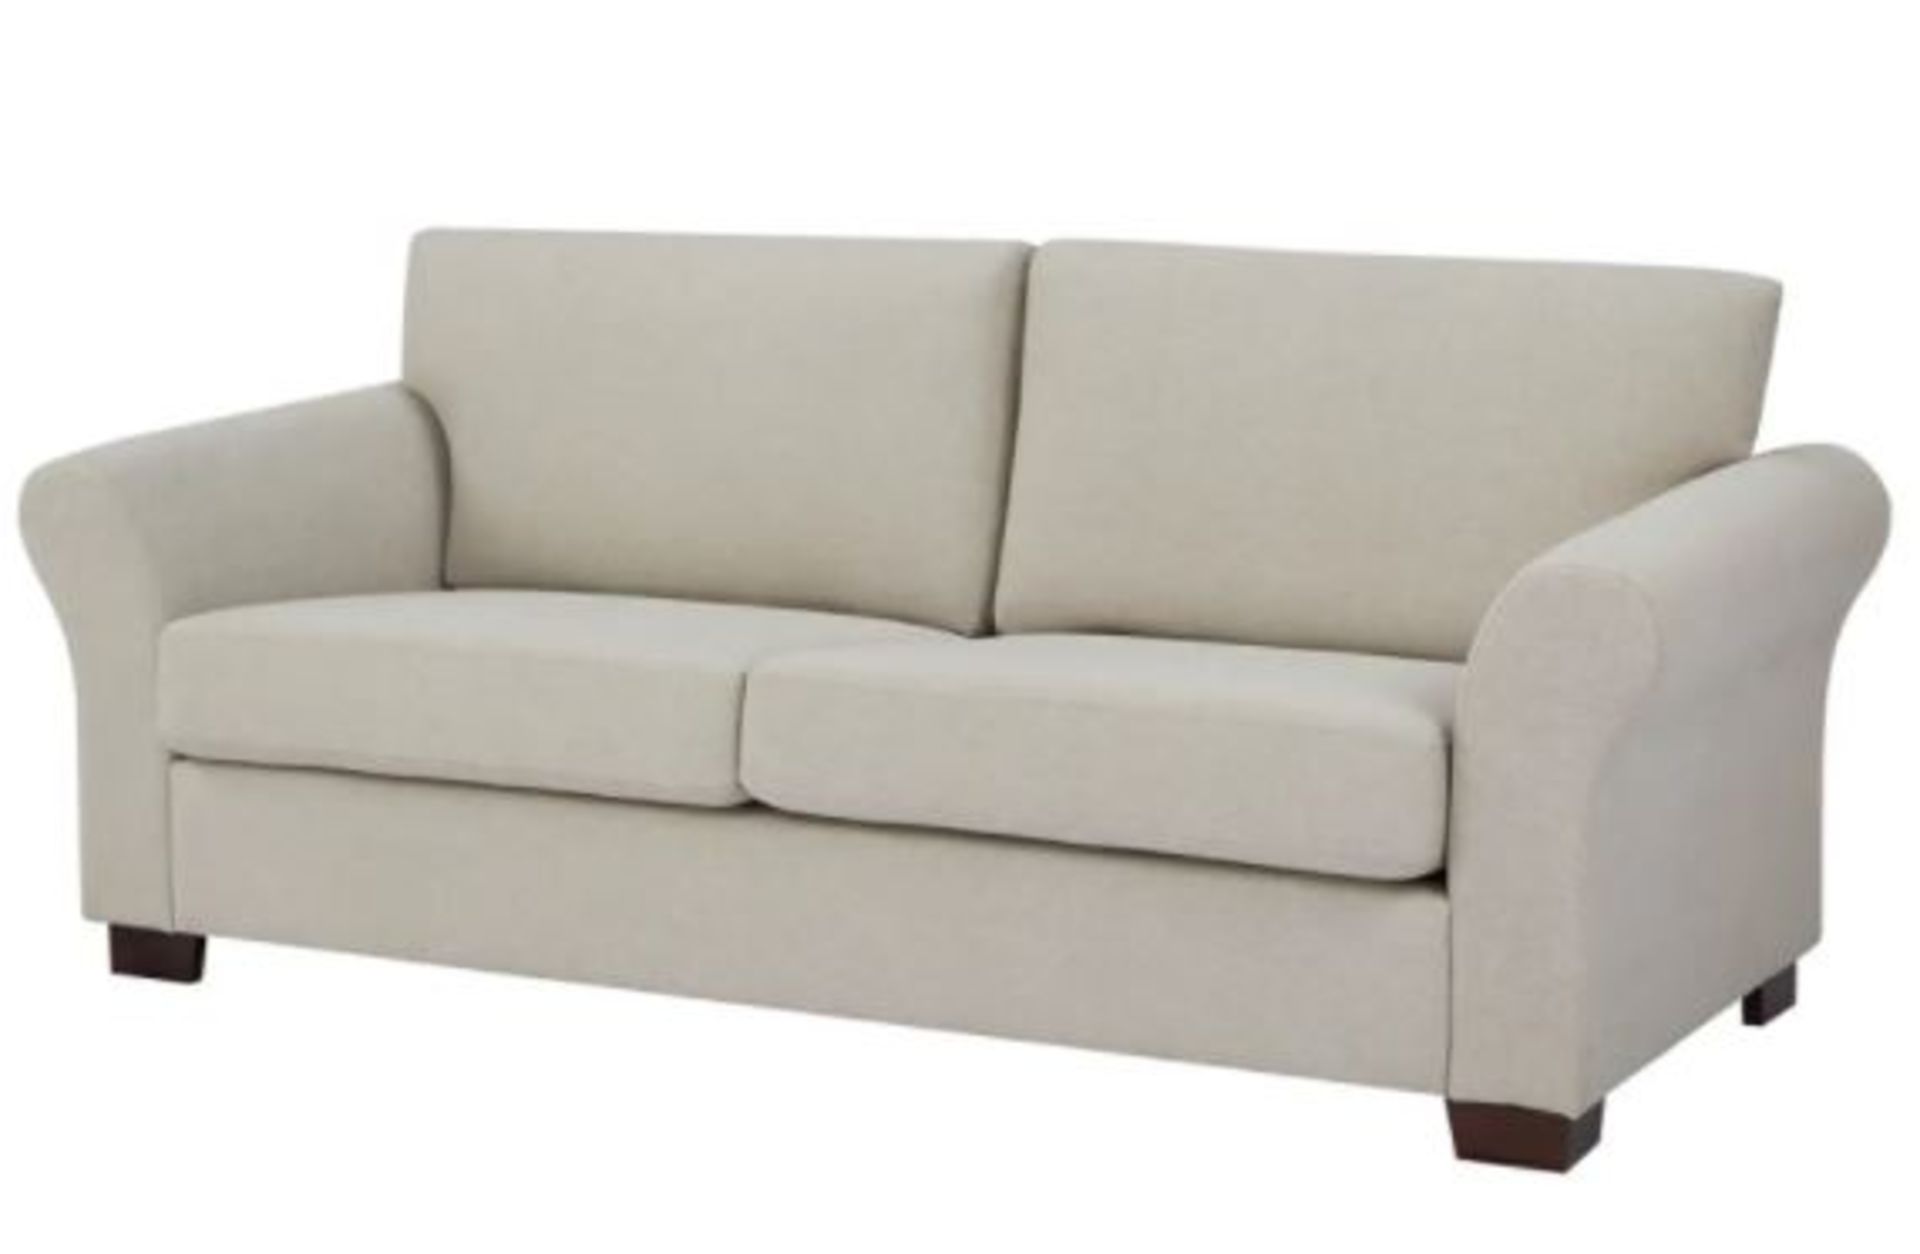 1x Hayley 3 Seater Sofa Natural Slub RRP £500. Pine Wood Frame And Beech Wood Legs. (H)87 x (W)20 - Image 2 of 8